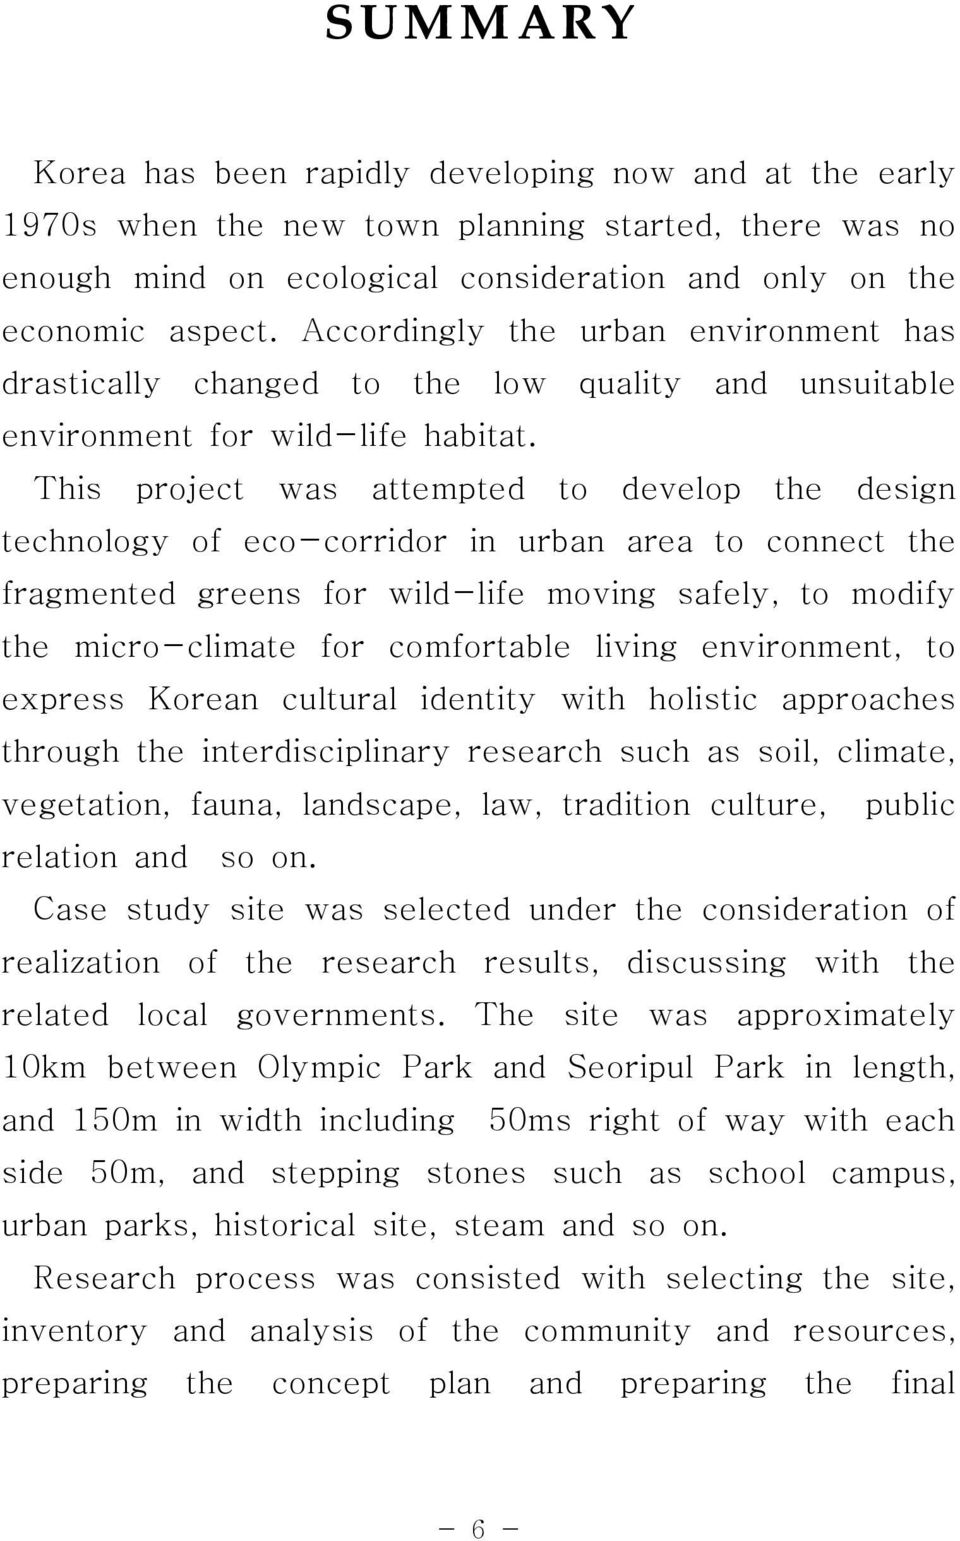 This project was attempted to develop the design technology of eco-corridor in urban area to connect the fragmented greens for wild-life moving safely, to modify the micro-climate for comfortable